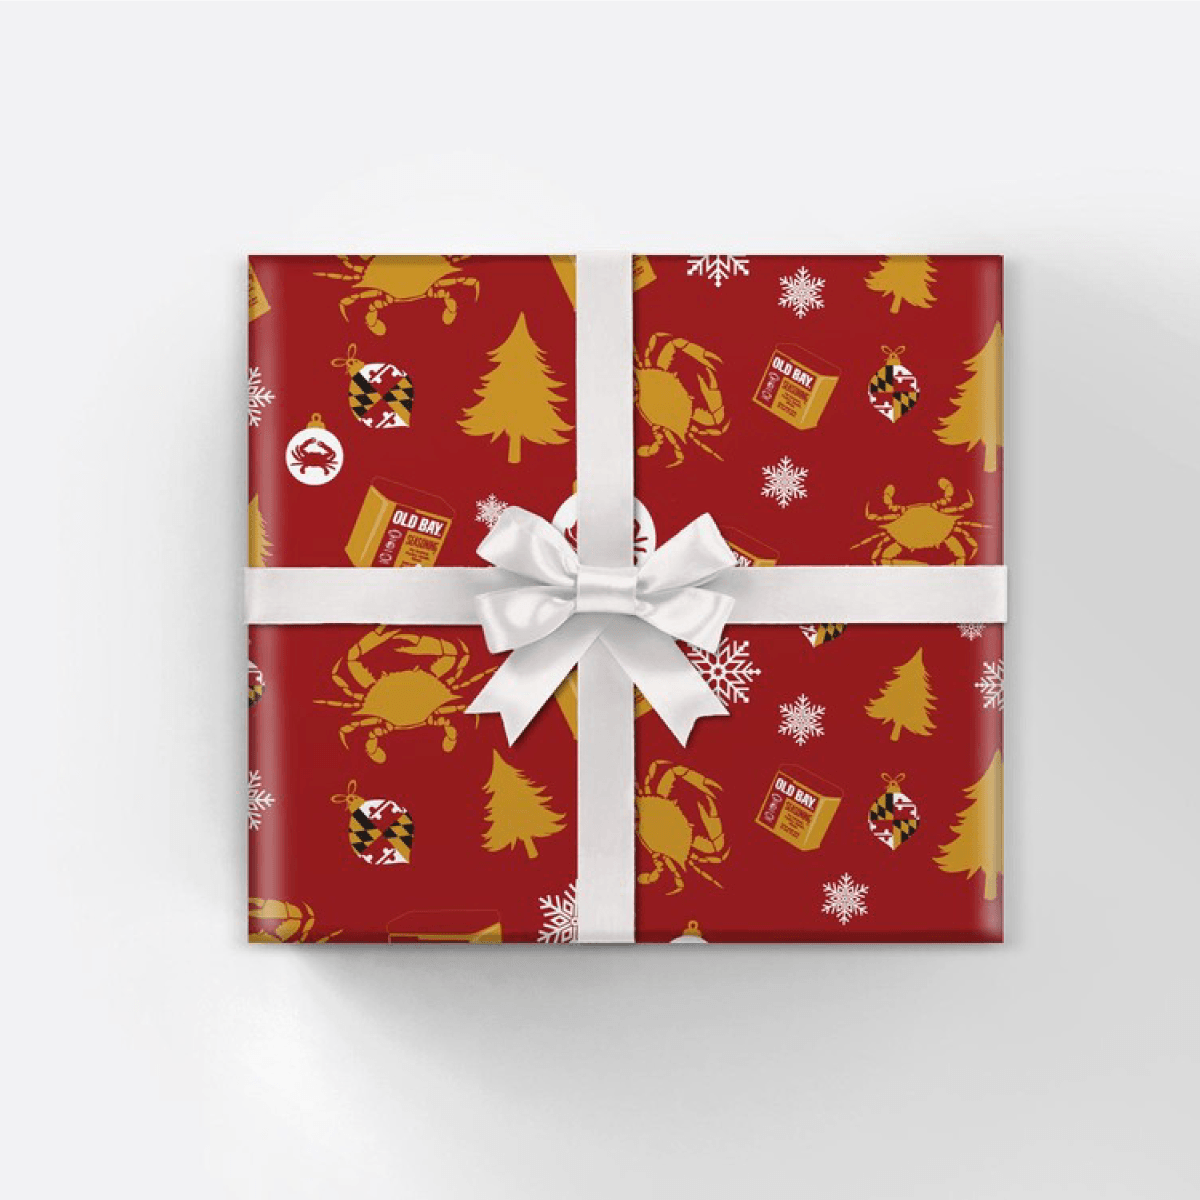 Old Bay Christmas Stencils (Red) / Gift Wrap - Route One Apparel